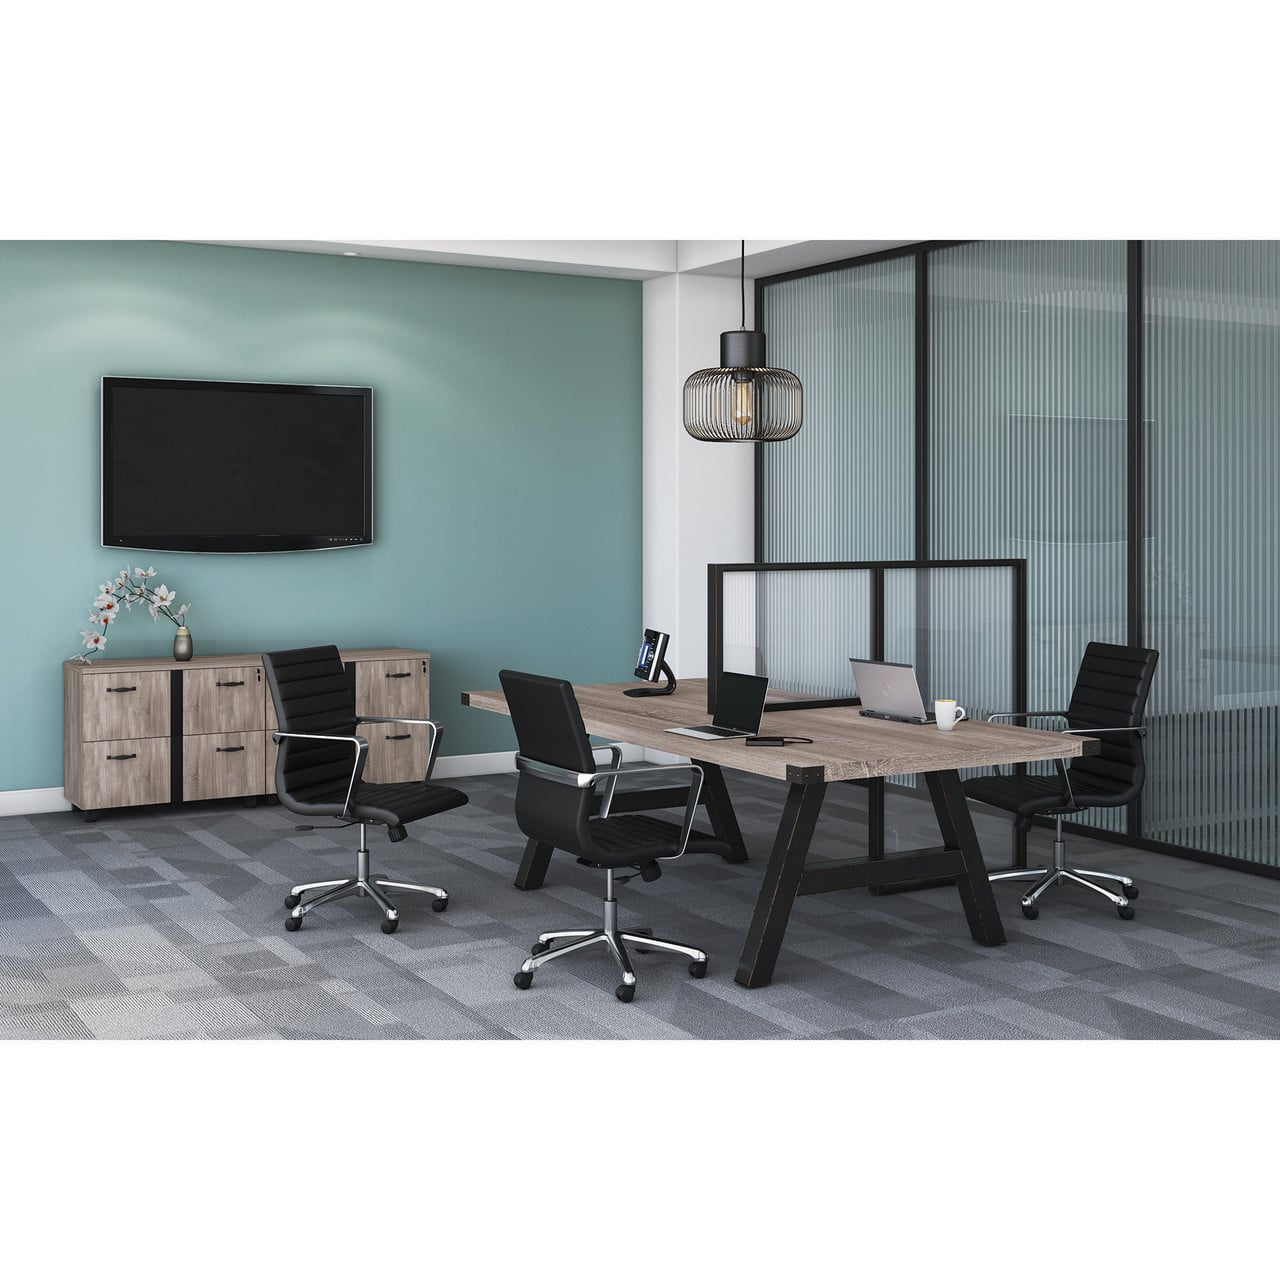 epitome collection conference room industrial modern